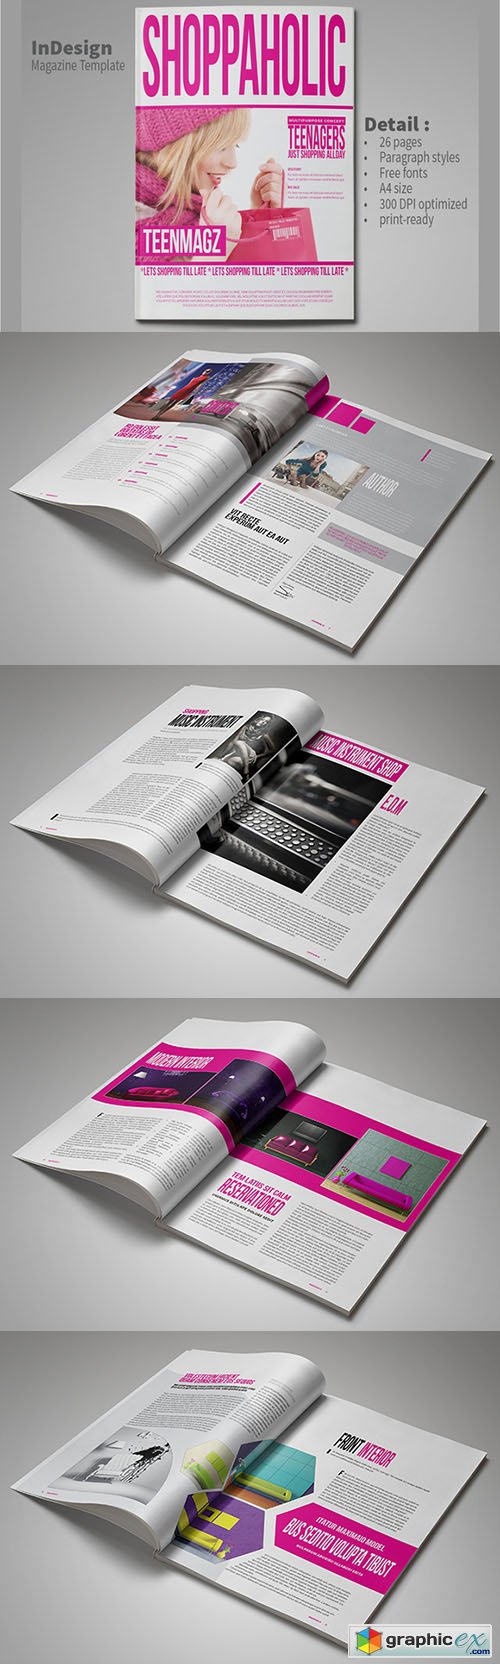  InDesign Magazine Template 26 Pages